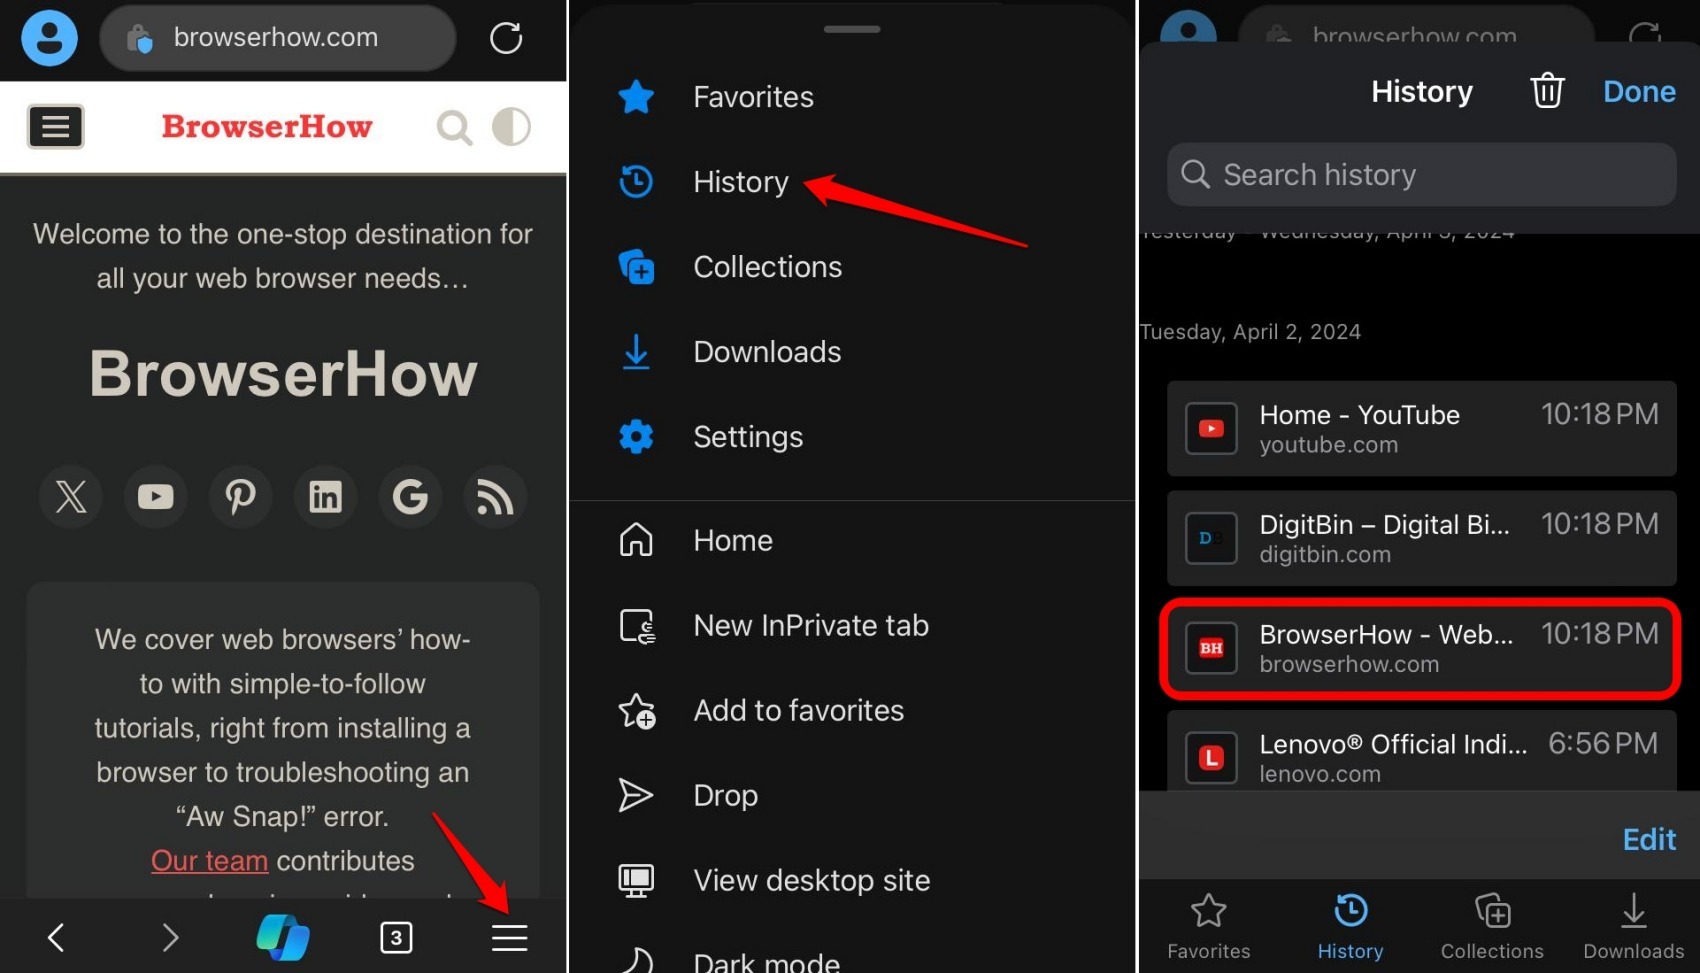 reopen closed tabs from history in Edge browser on iPhone